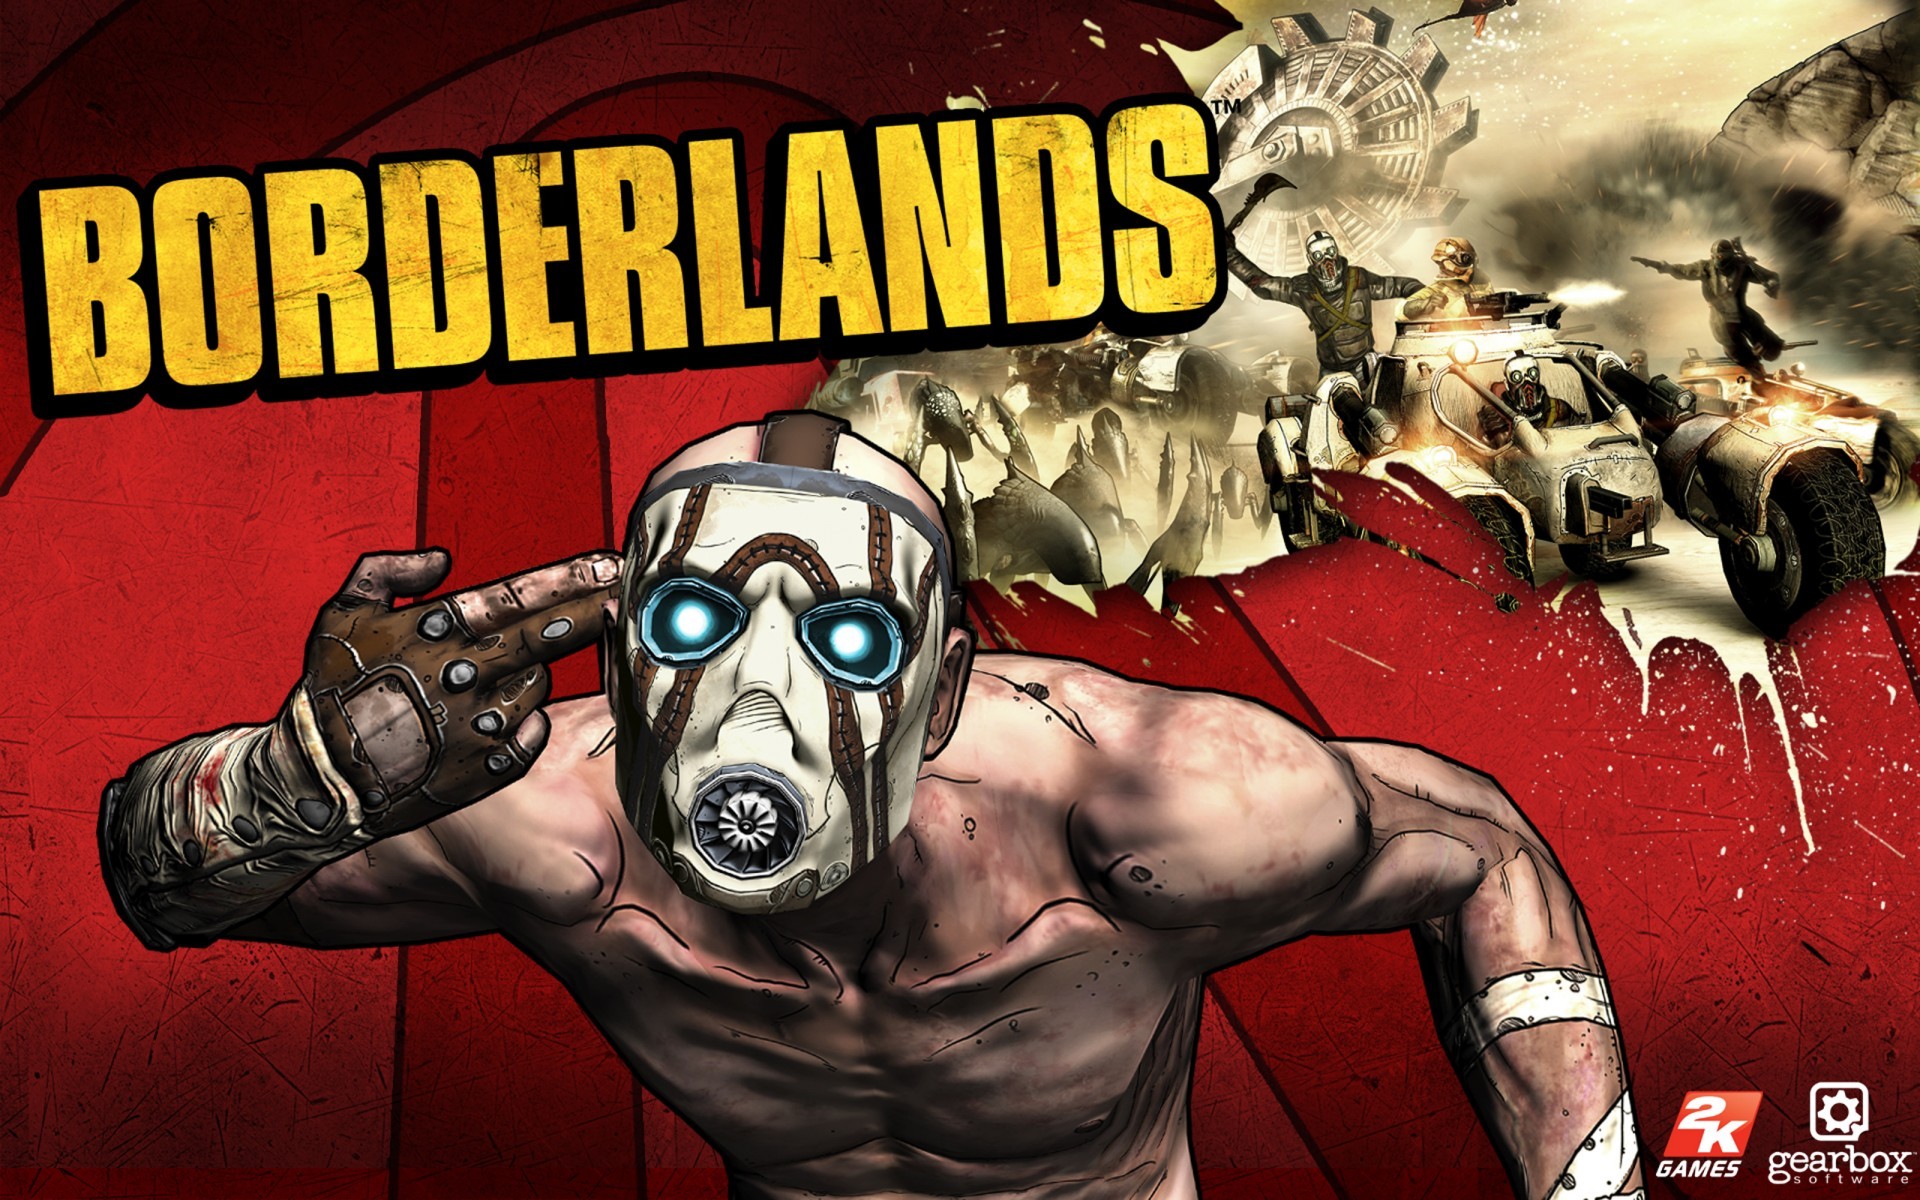 General 1920x1200 Borderlands video games video game art Gearbox Software PC gaming